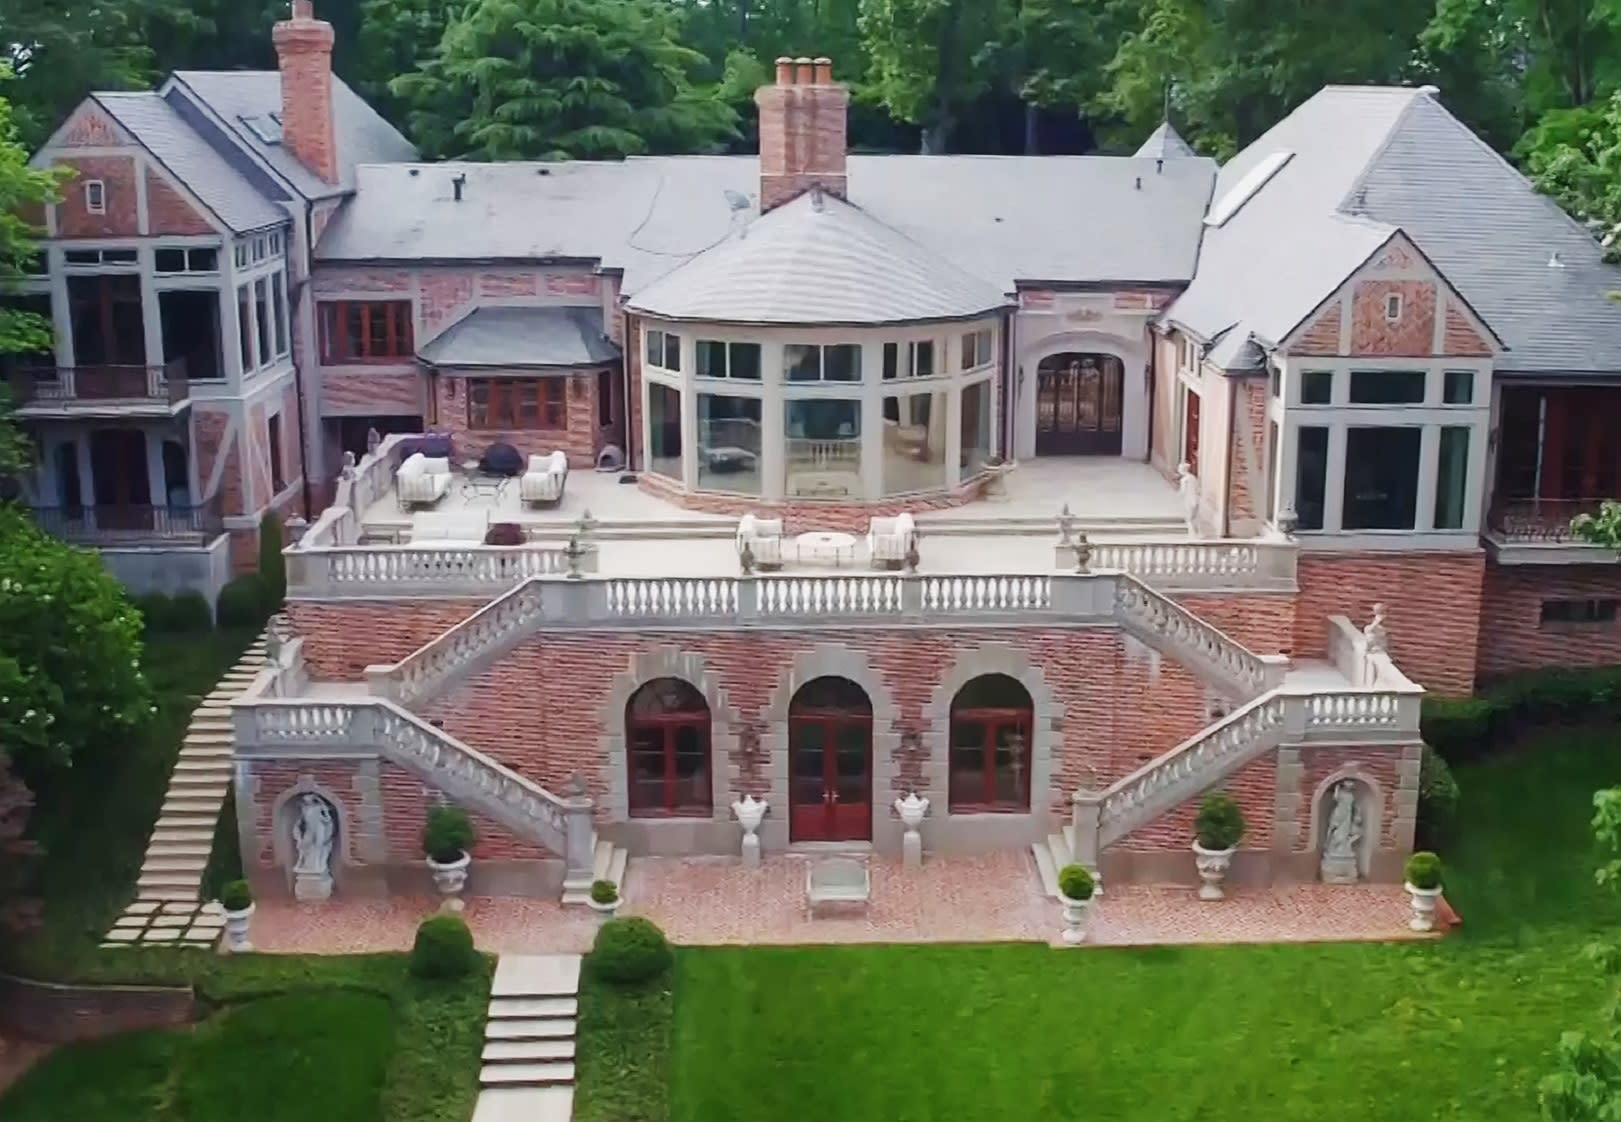 Most expensive house in Georgia on the market for $48 million